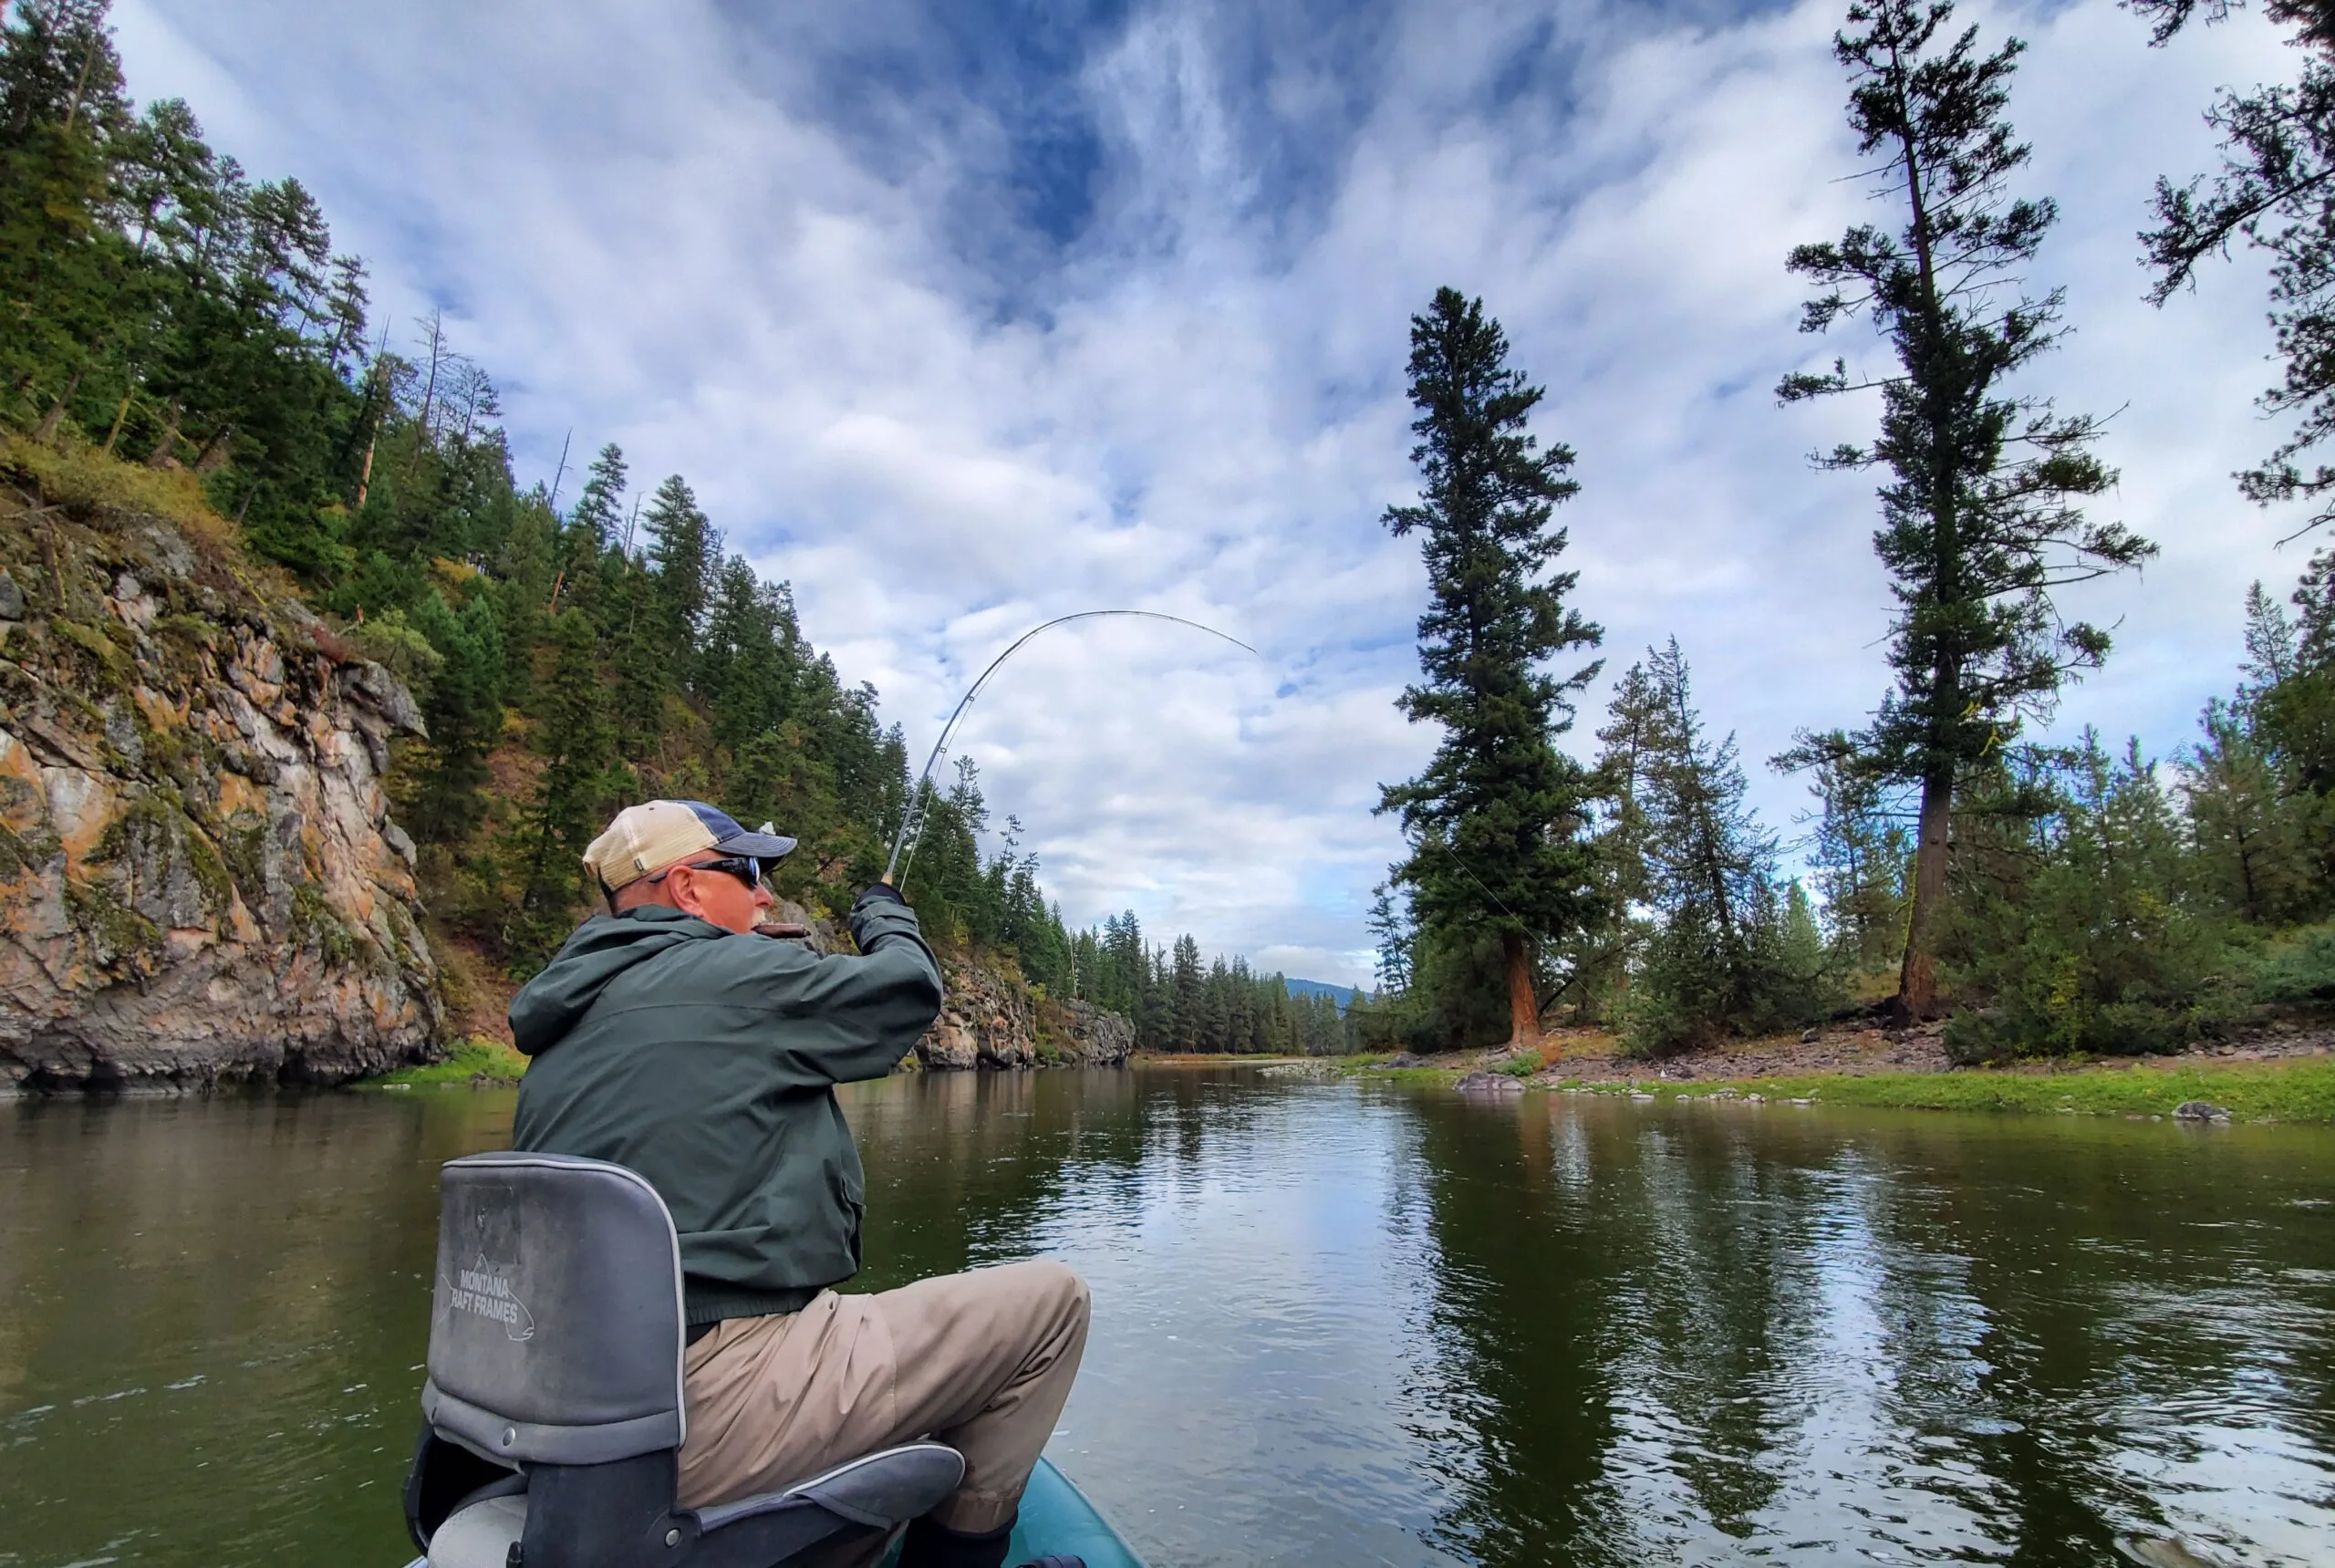 Bent Fly Fishing ⋆ Guided Fly Fishing Trips in Montana